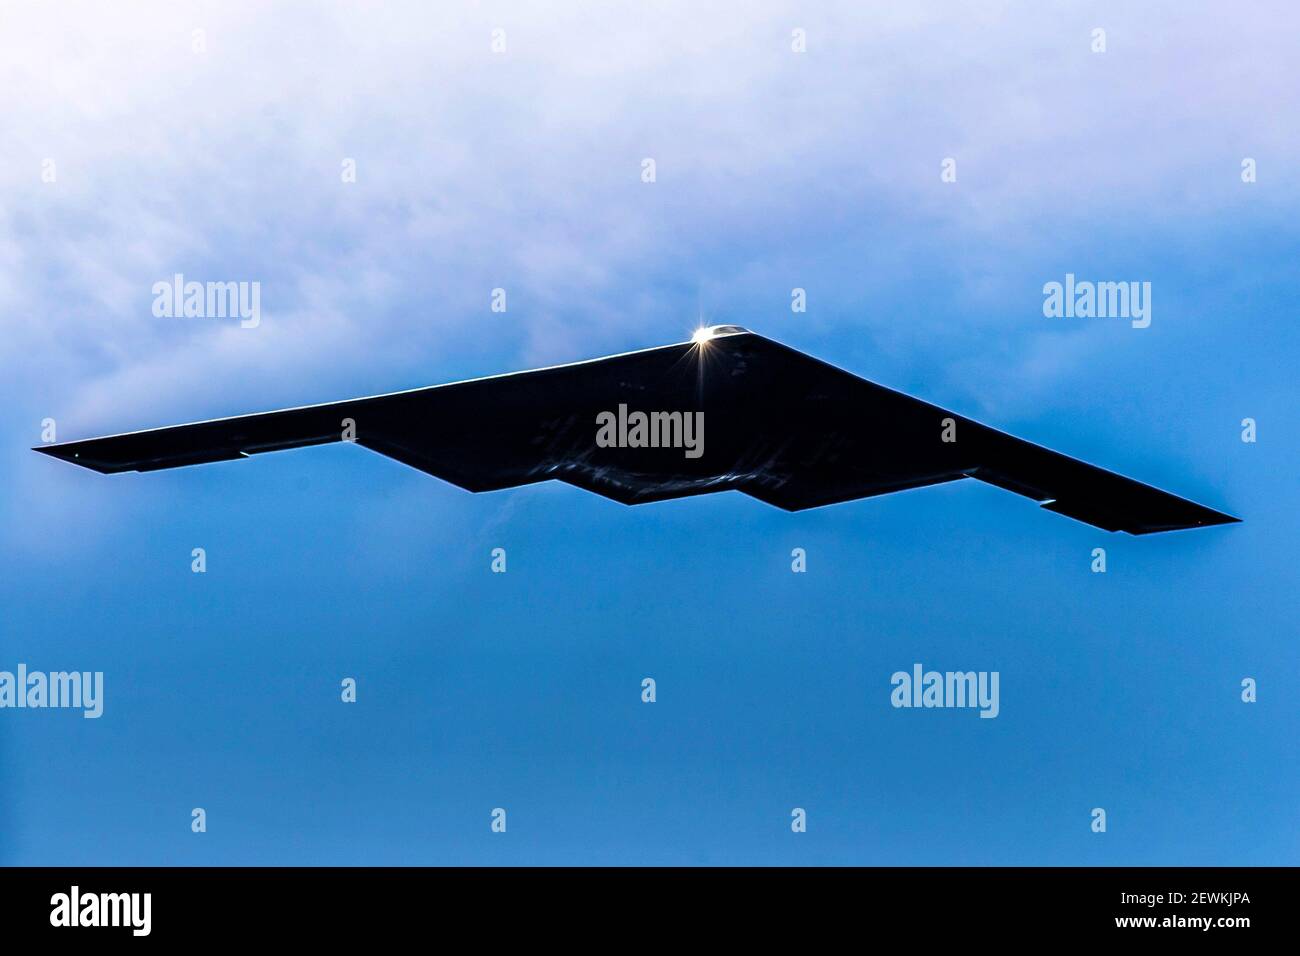 A B-2 Spirit stealth bomber flies over the U. S. Air Force Academy in Colorado Springs, Colo. , Nov. 16, 2020. The B-2â.s stealth characteristics Stock Photo